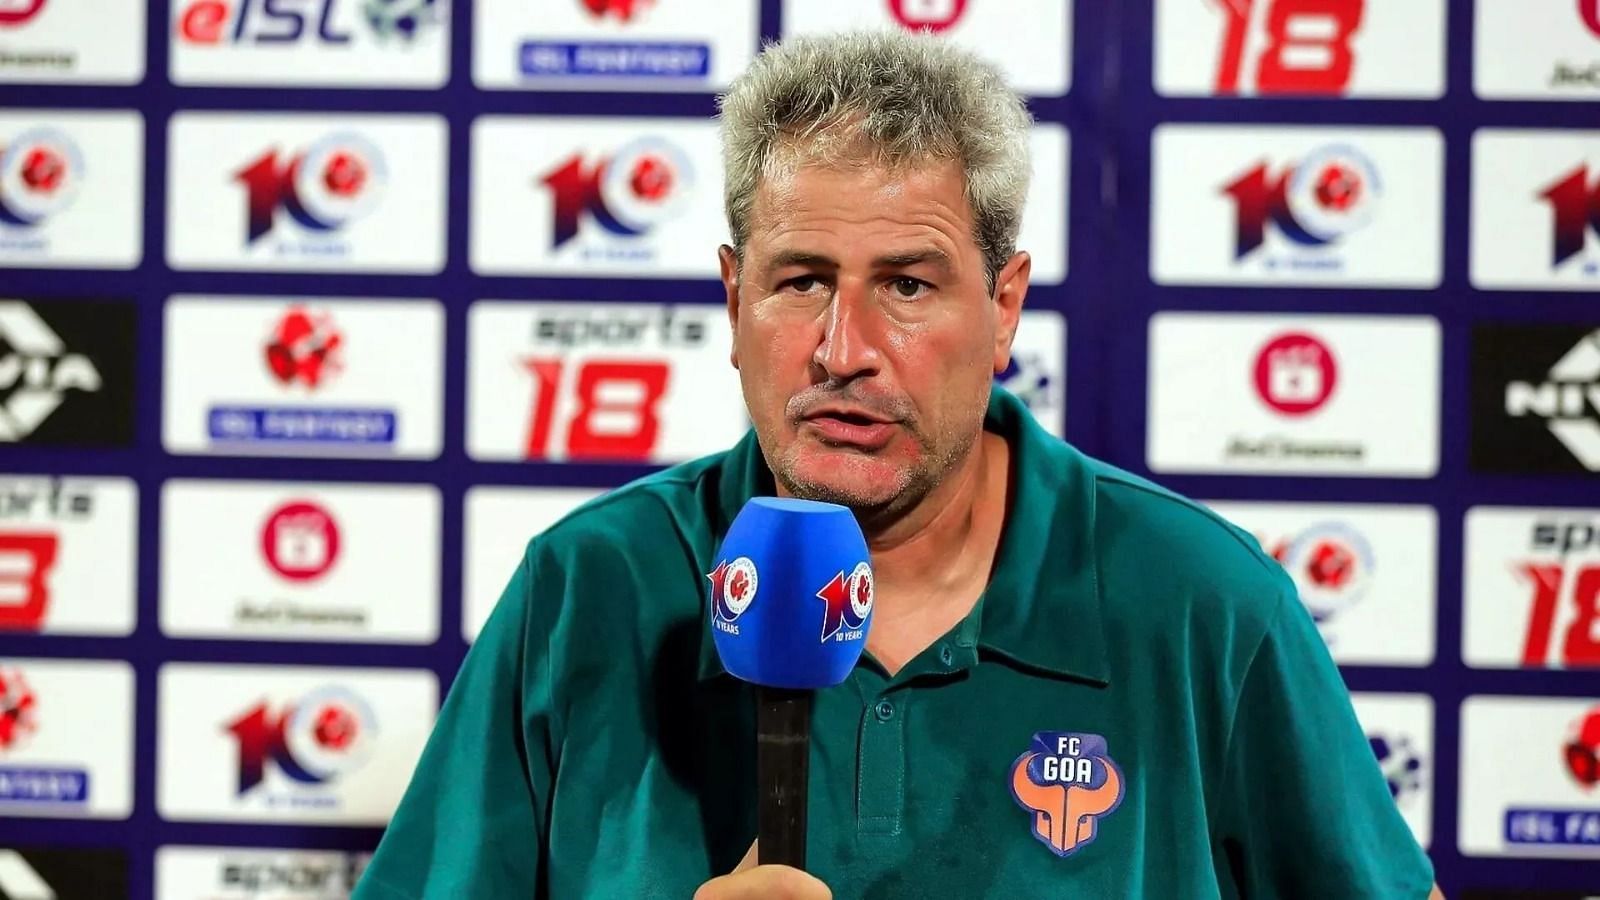 FC Goa head coach Manolo Marquez has expressed disappointment over his side